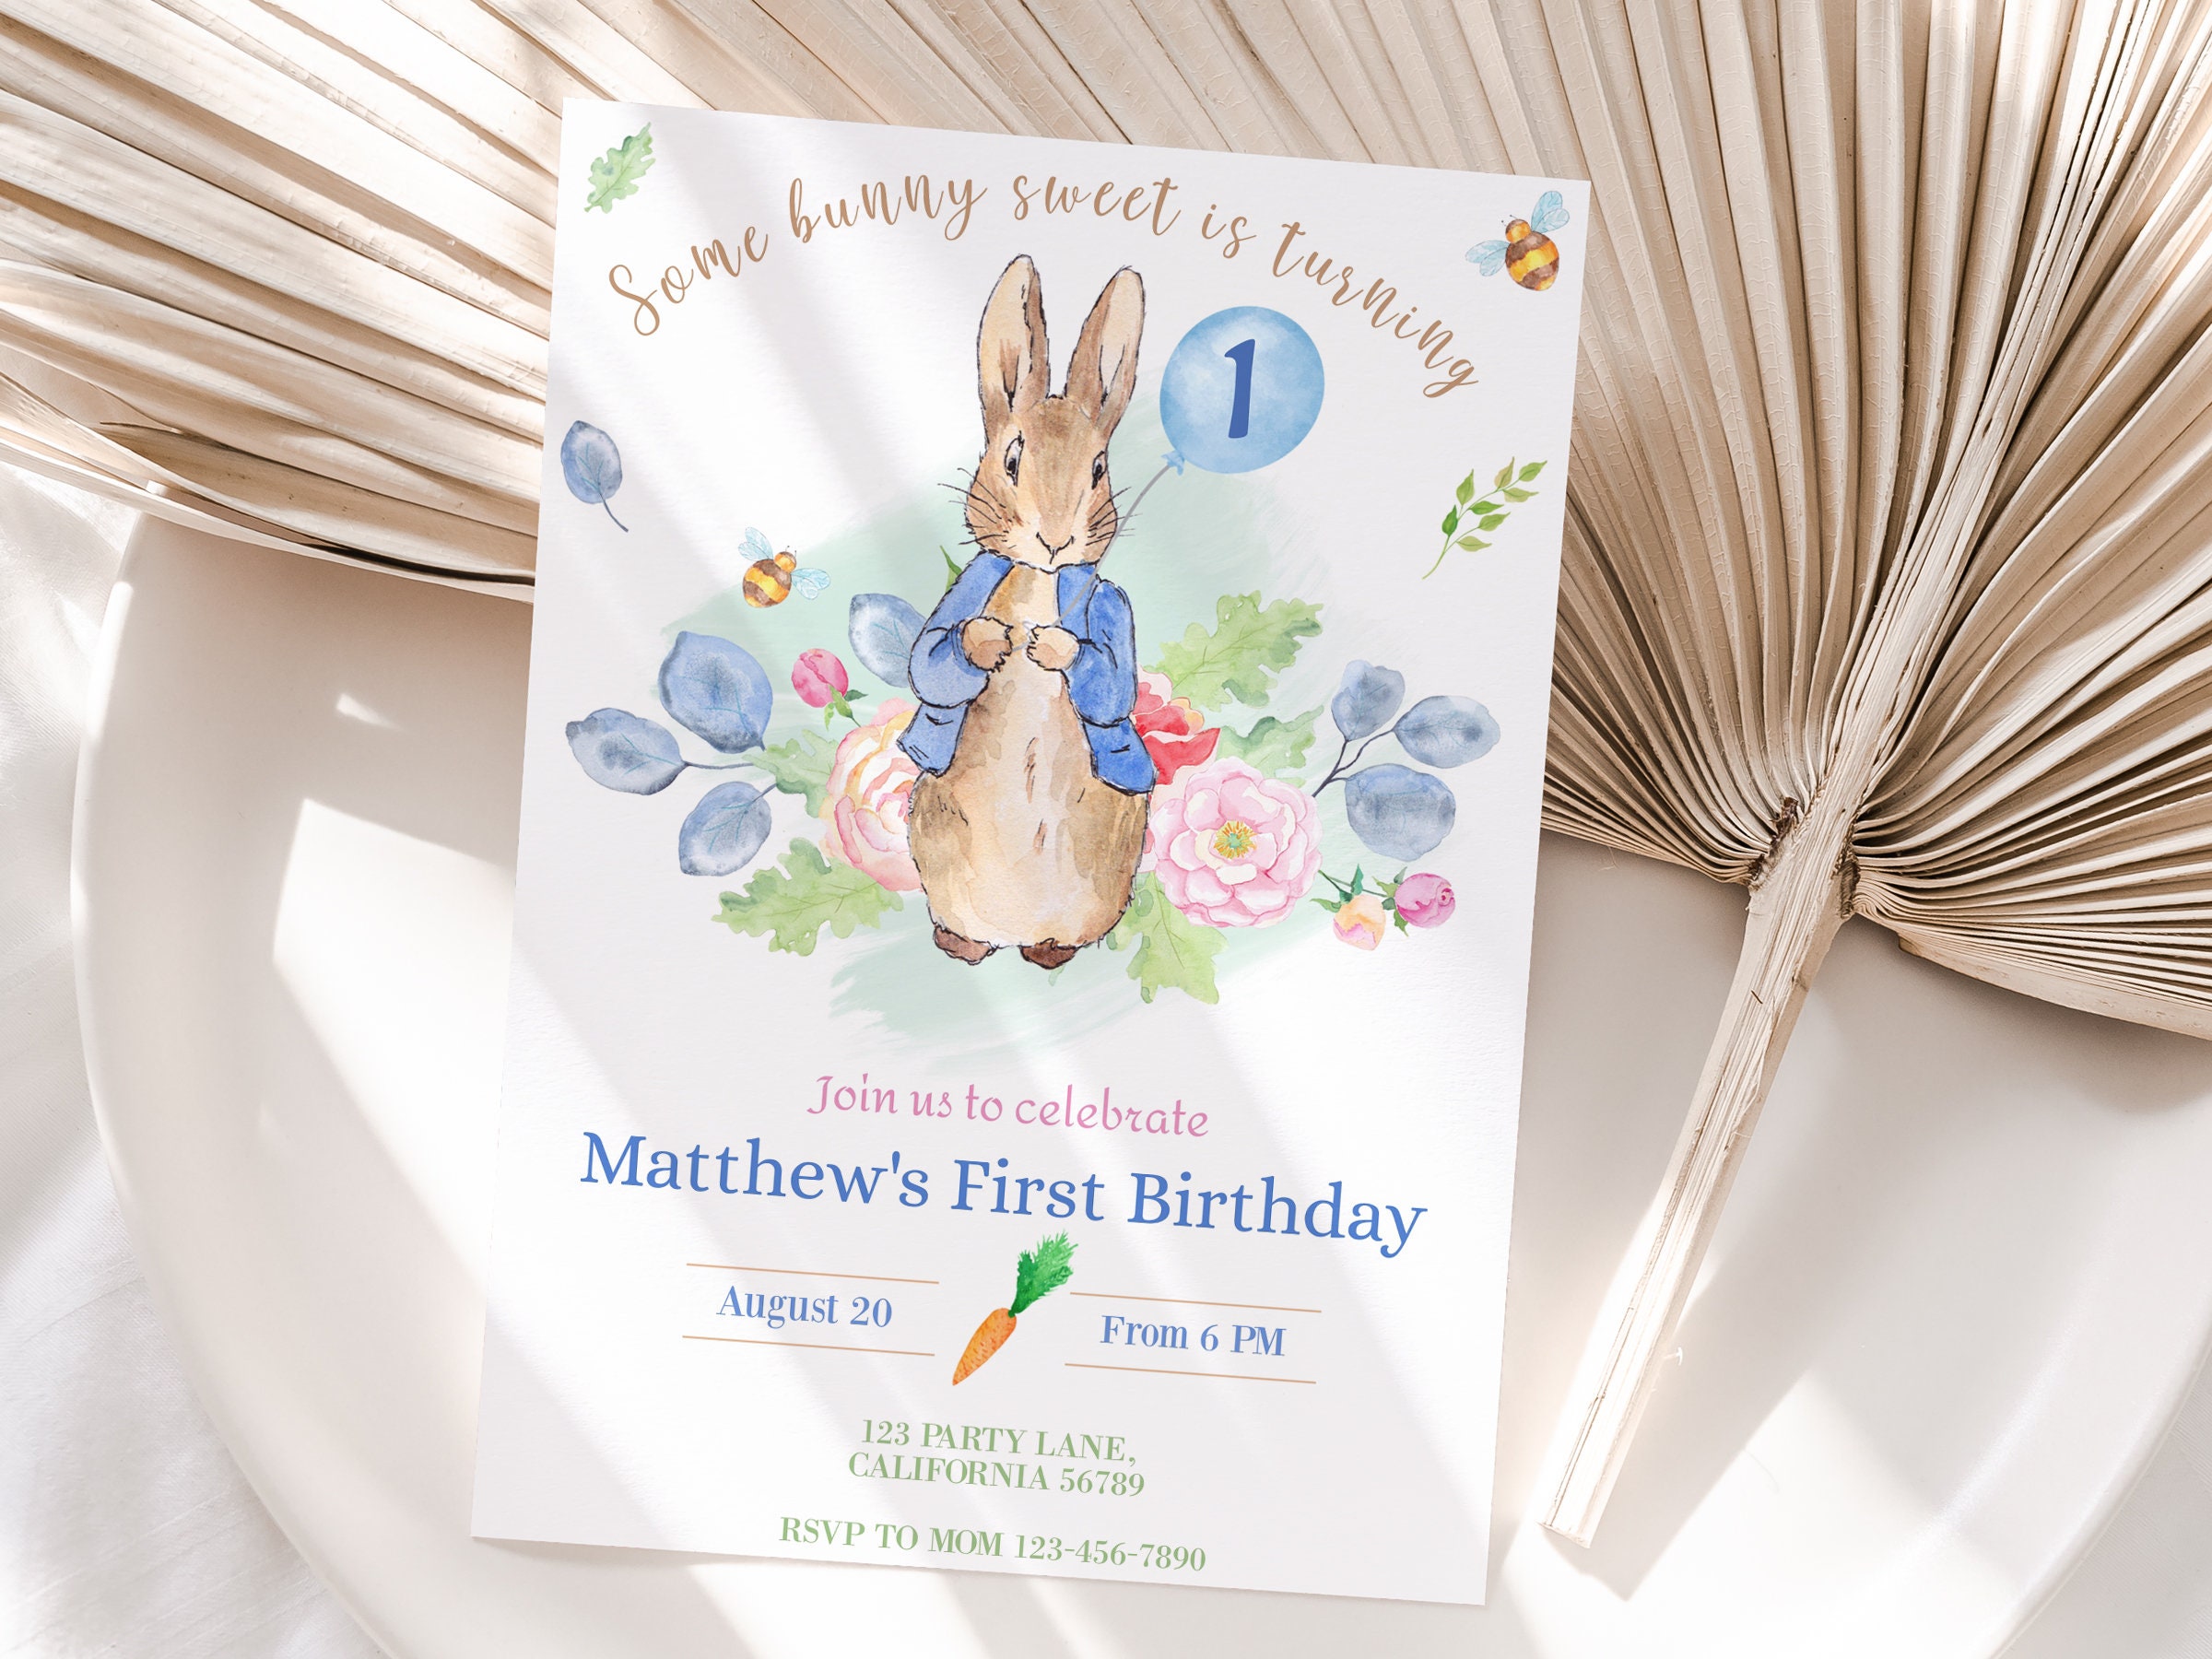 An Adorable Peter Rabbit Baby Shower – Teacups and Glitter